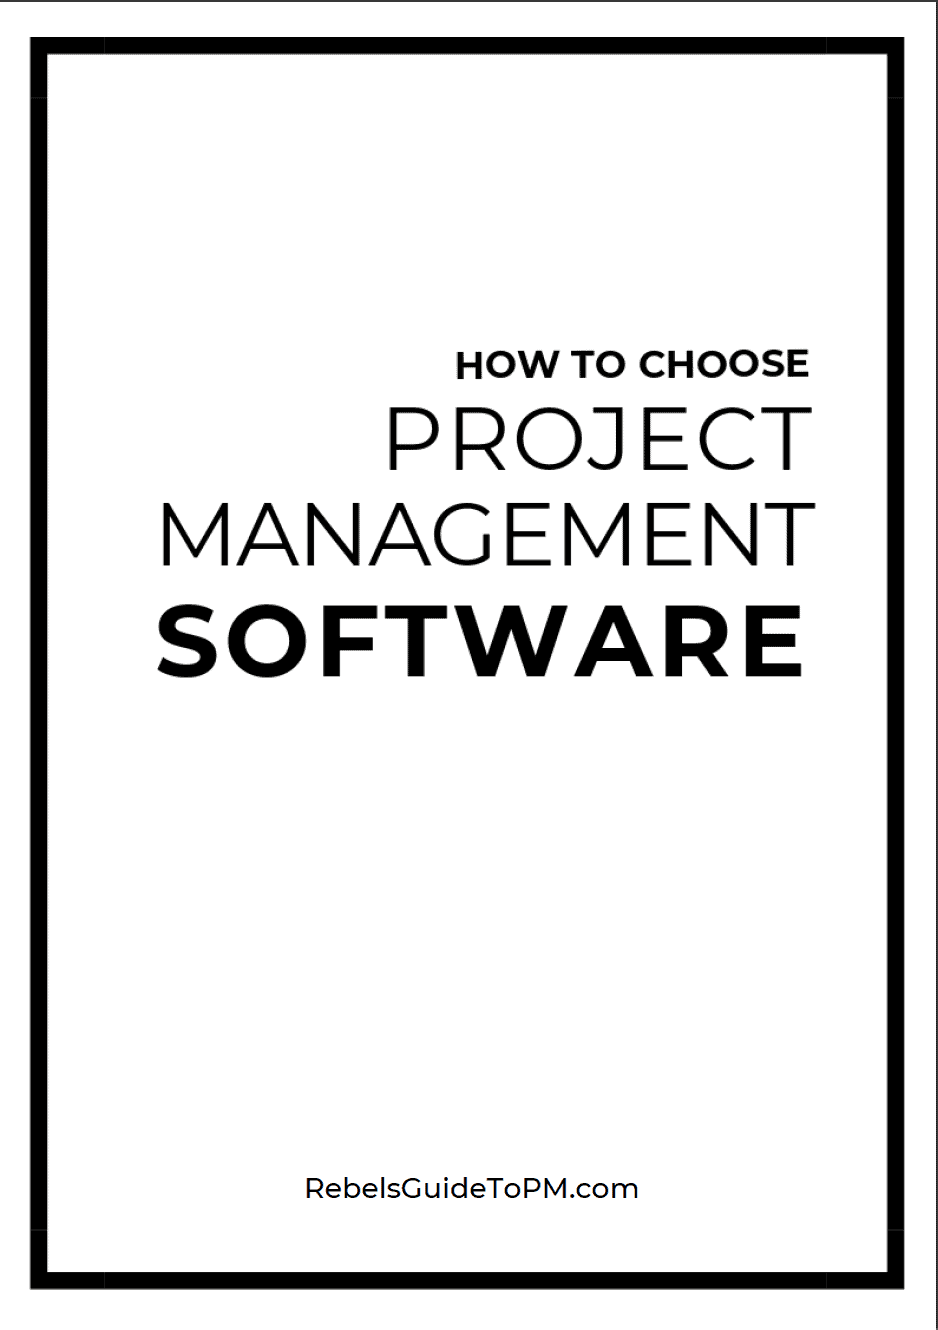 How to choose project management software